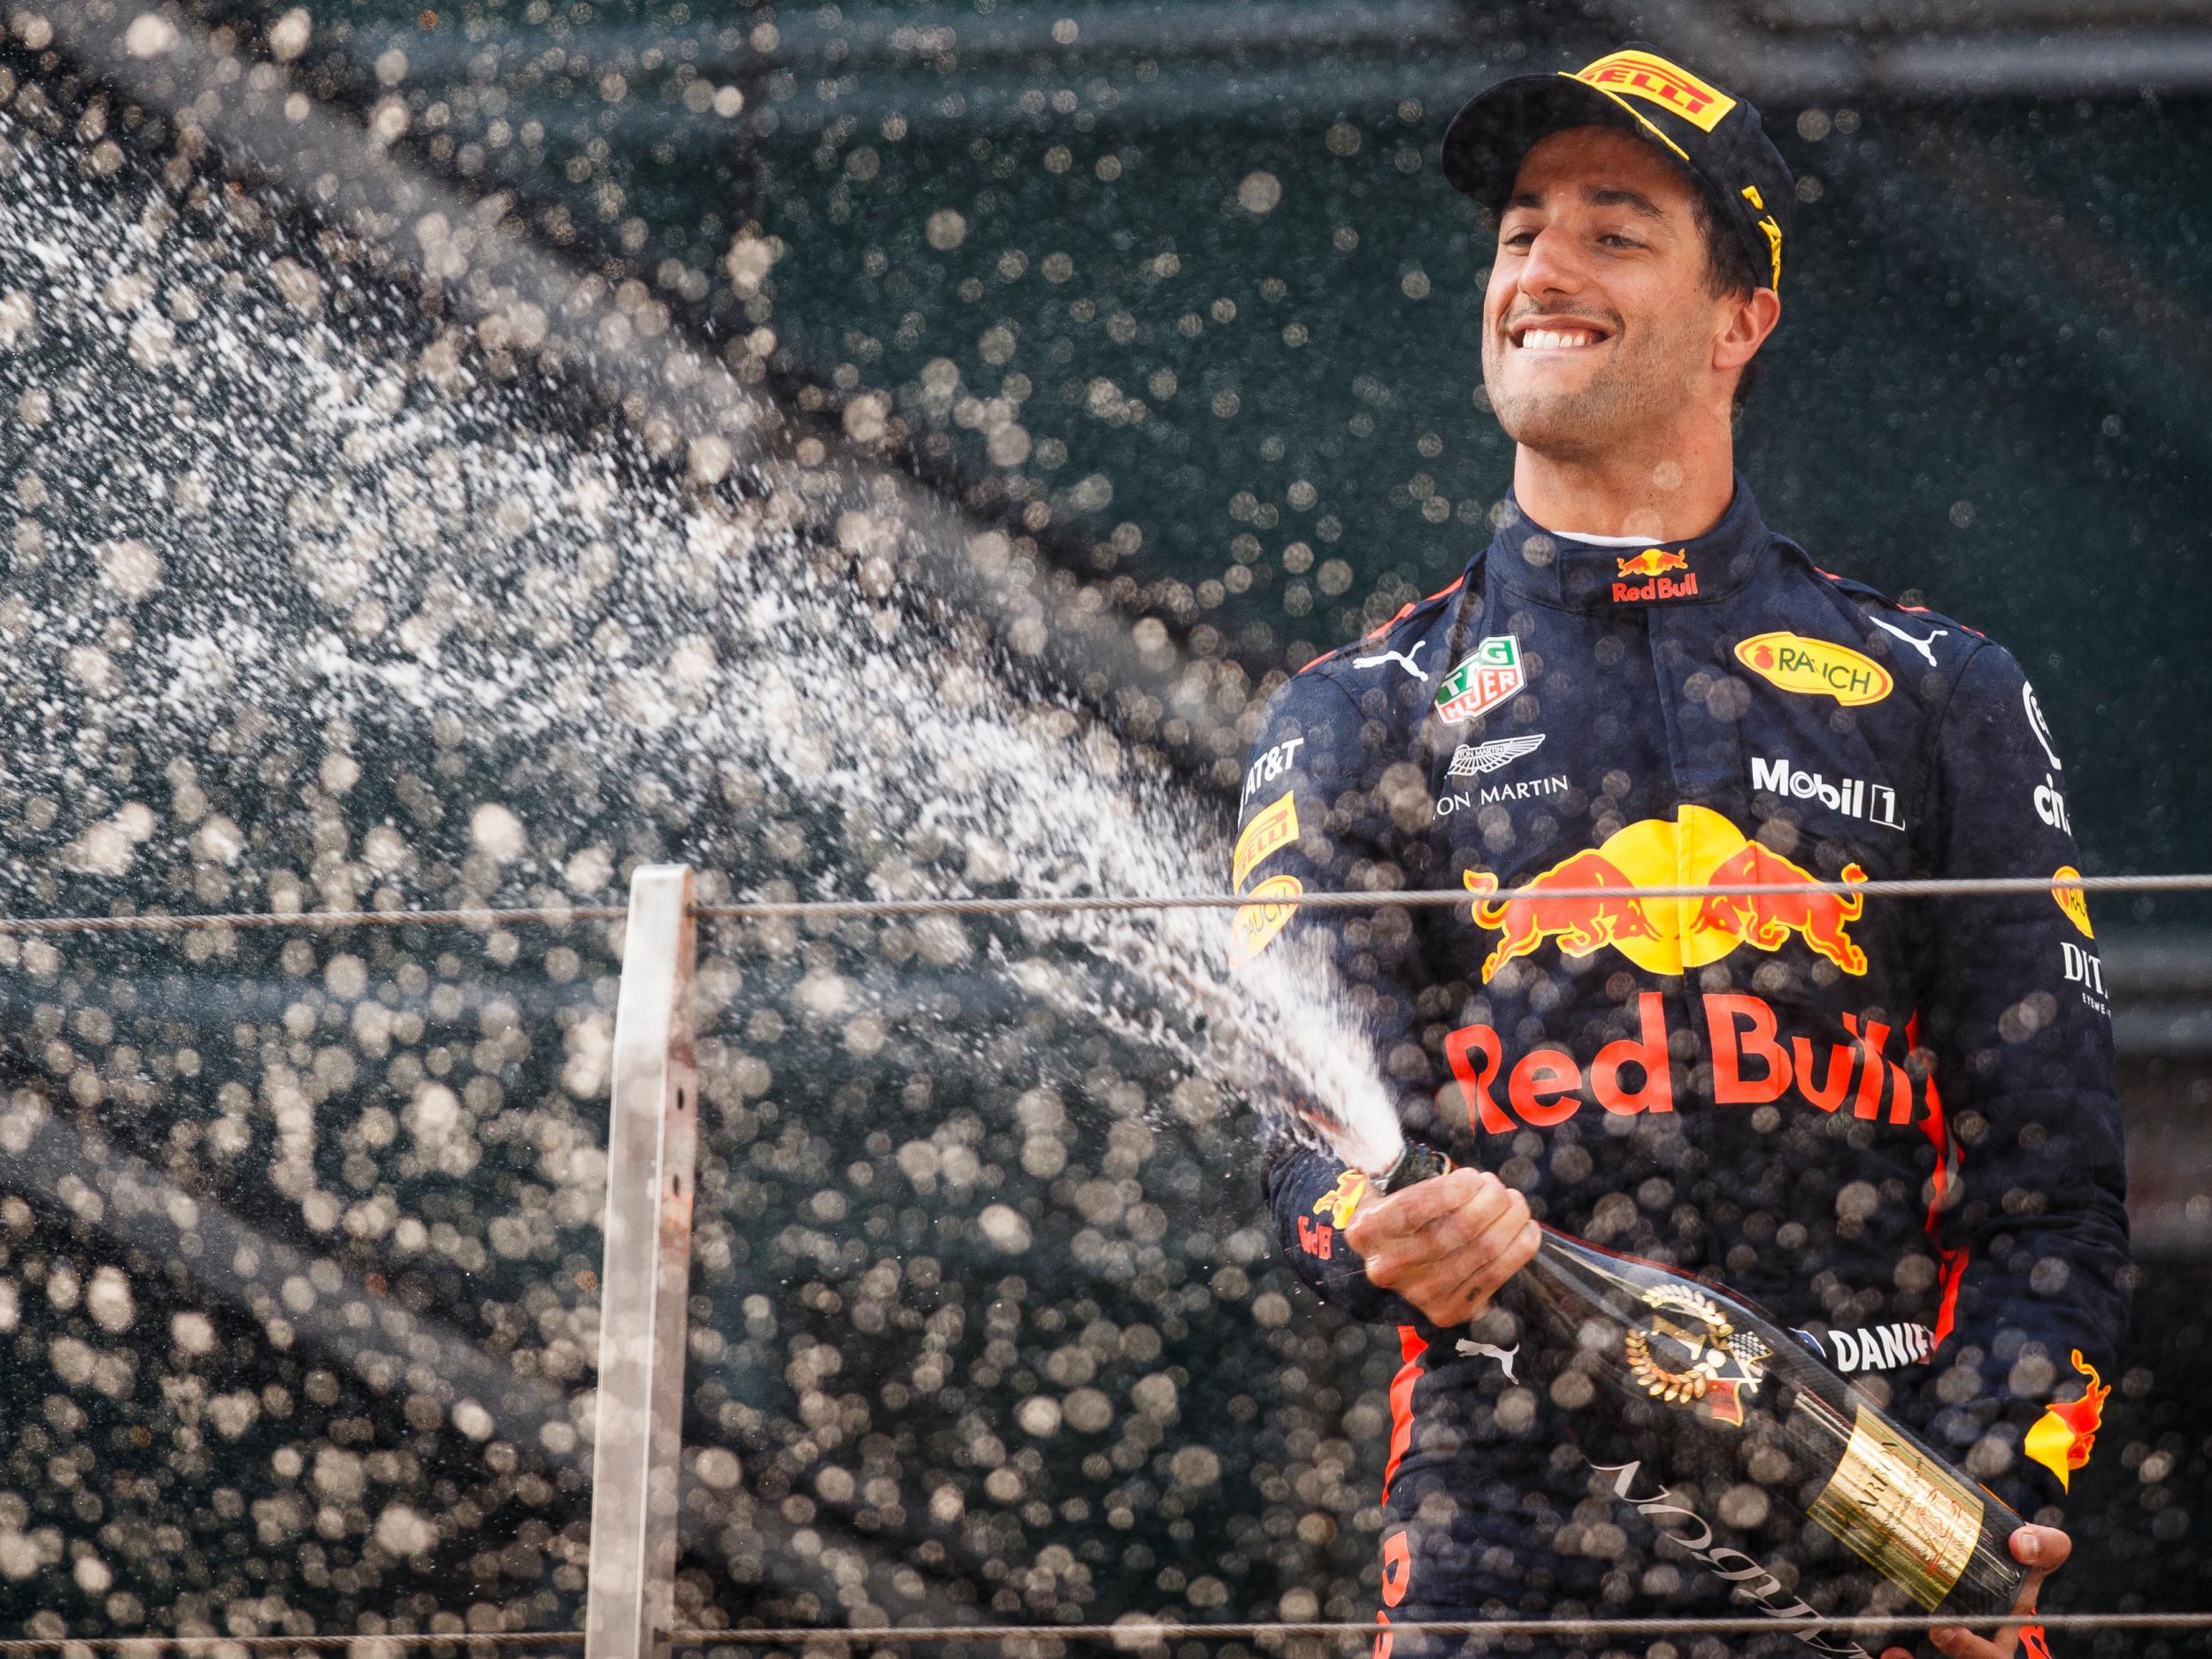 Daniel Ricciardo took the chequered flag after an action-packed race